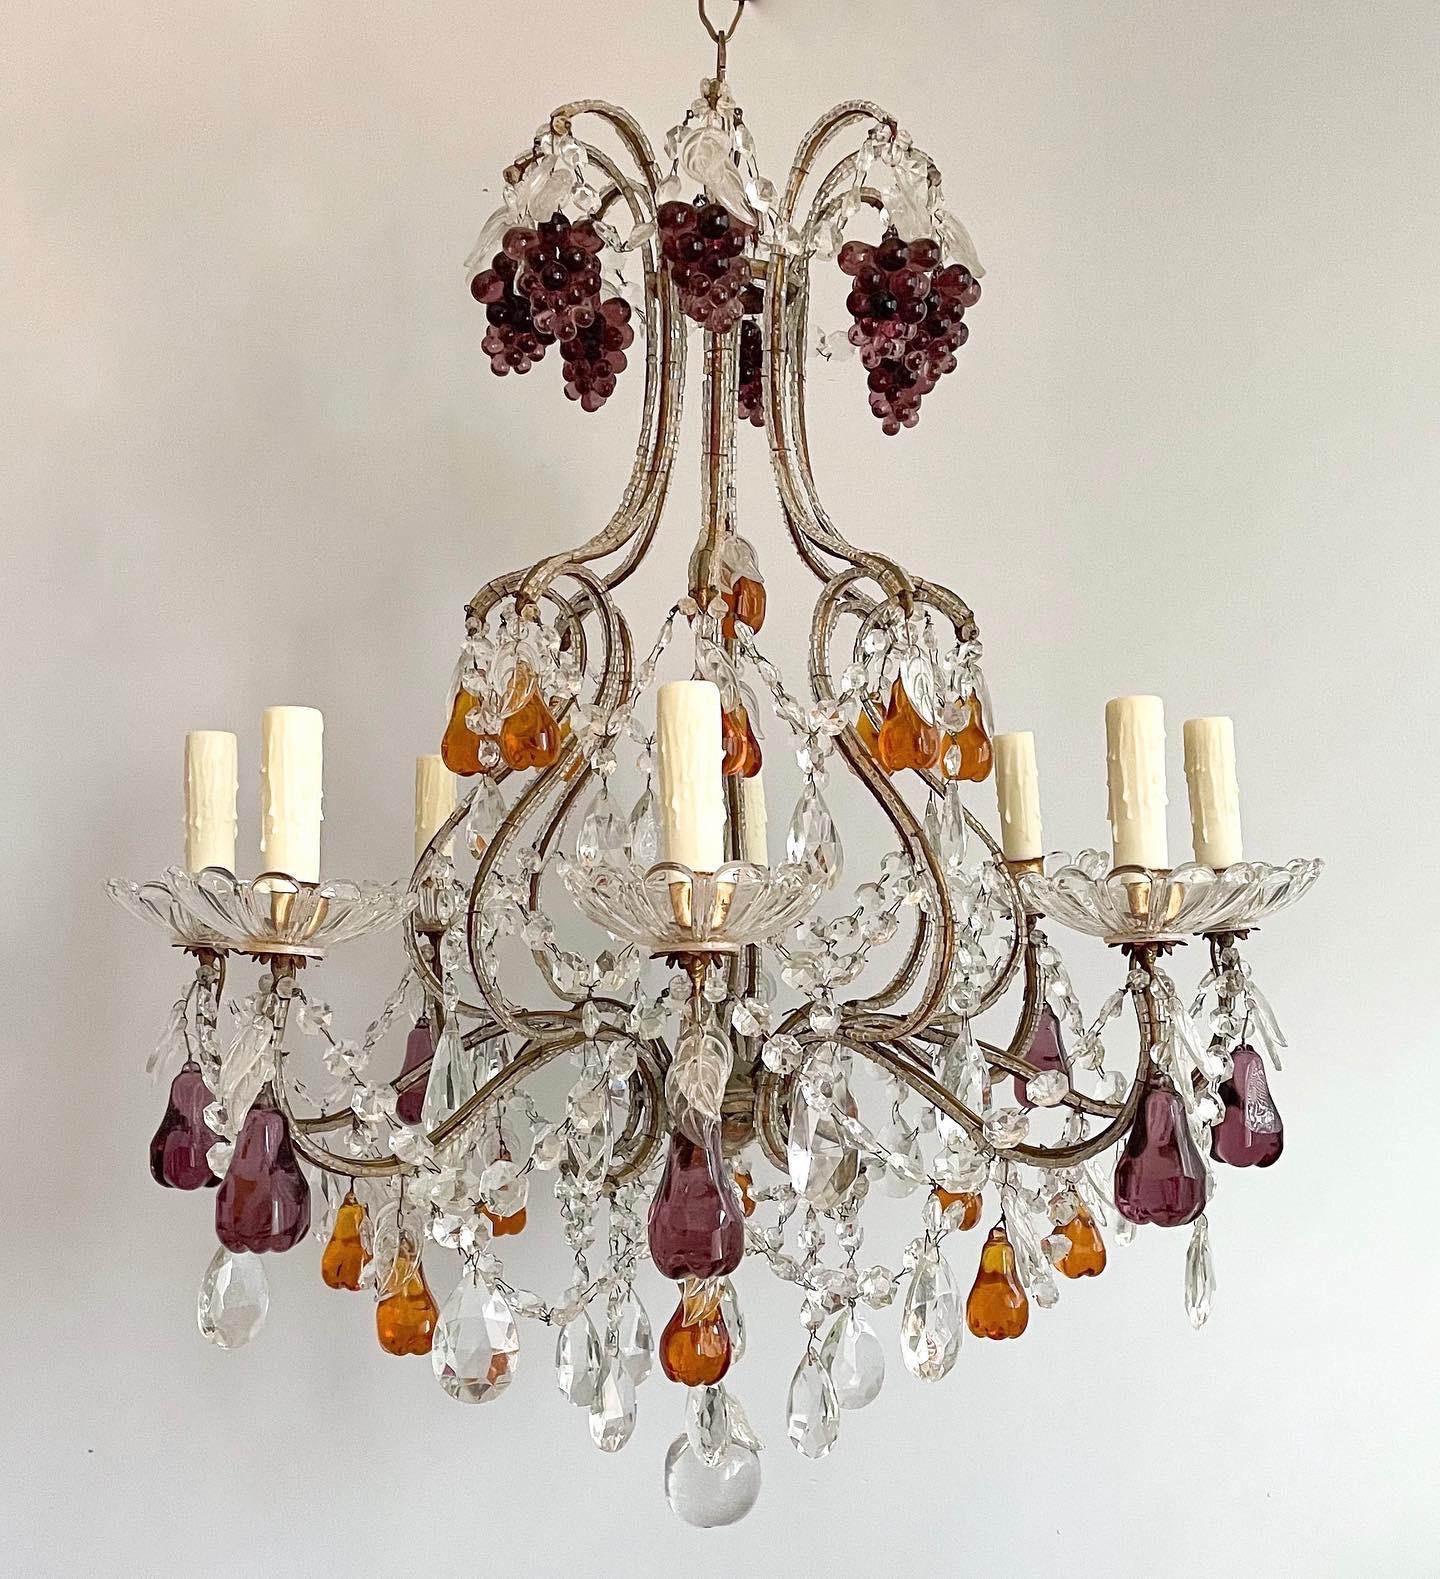 Fabulous, Italian 1950s gilt iron and crystal chandelier with Murano glass fruit decorations.

 The chandelier consists of a gracefully scrolled gilt-iron frame with an assortment of glass fruits including grape clusters, pears and apples. 

